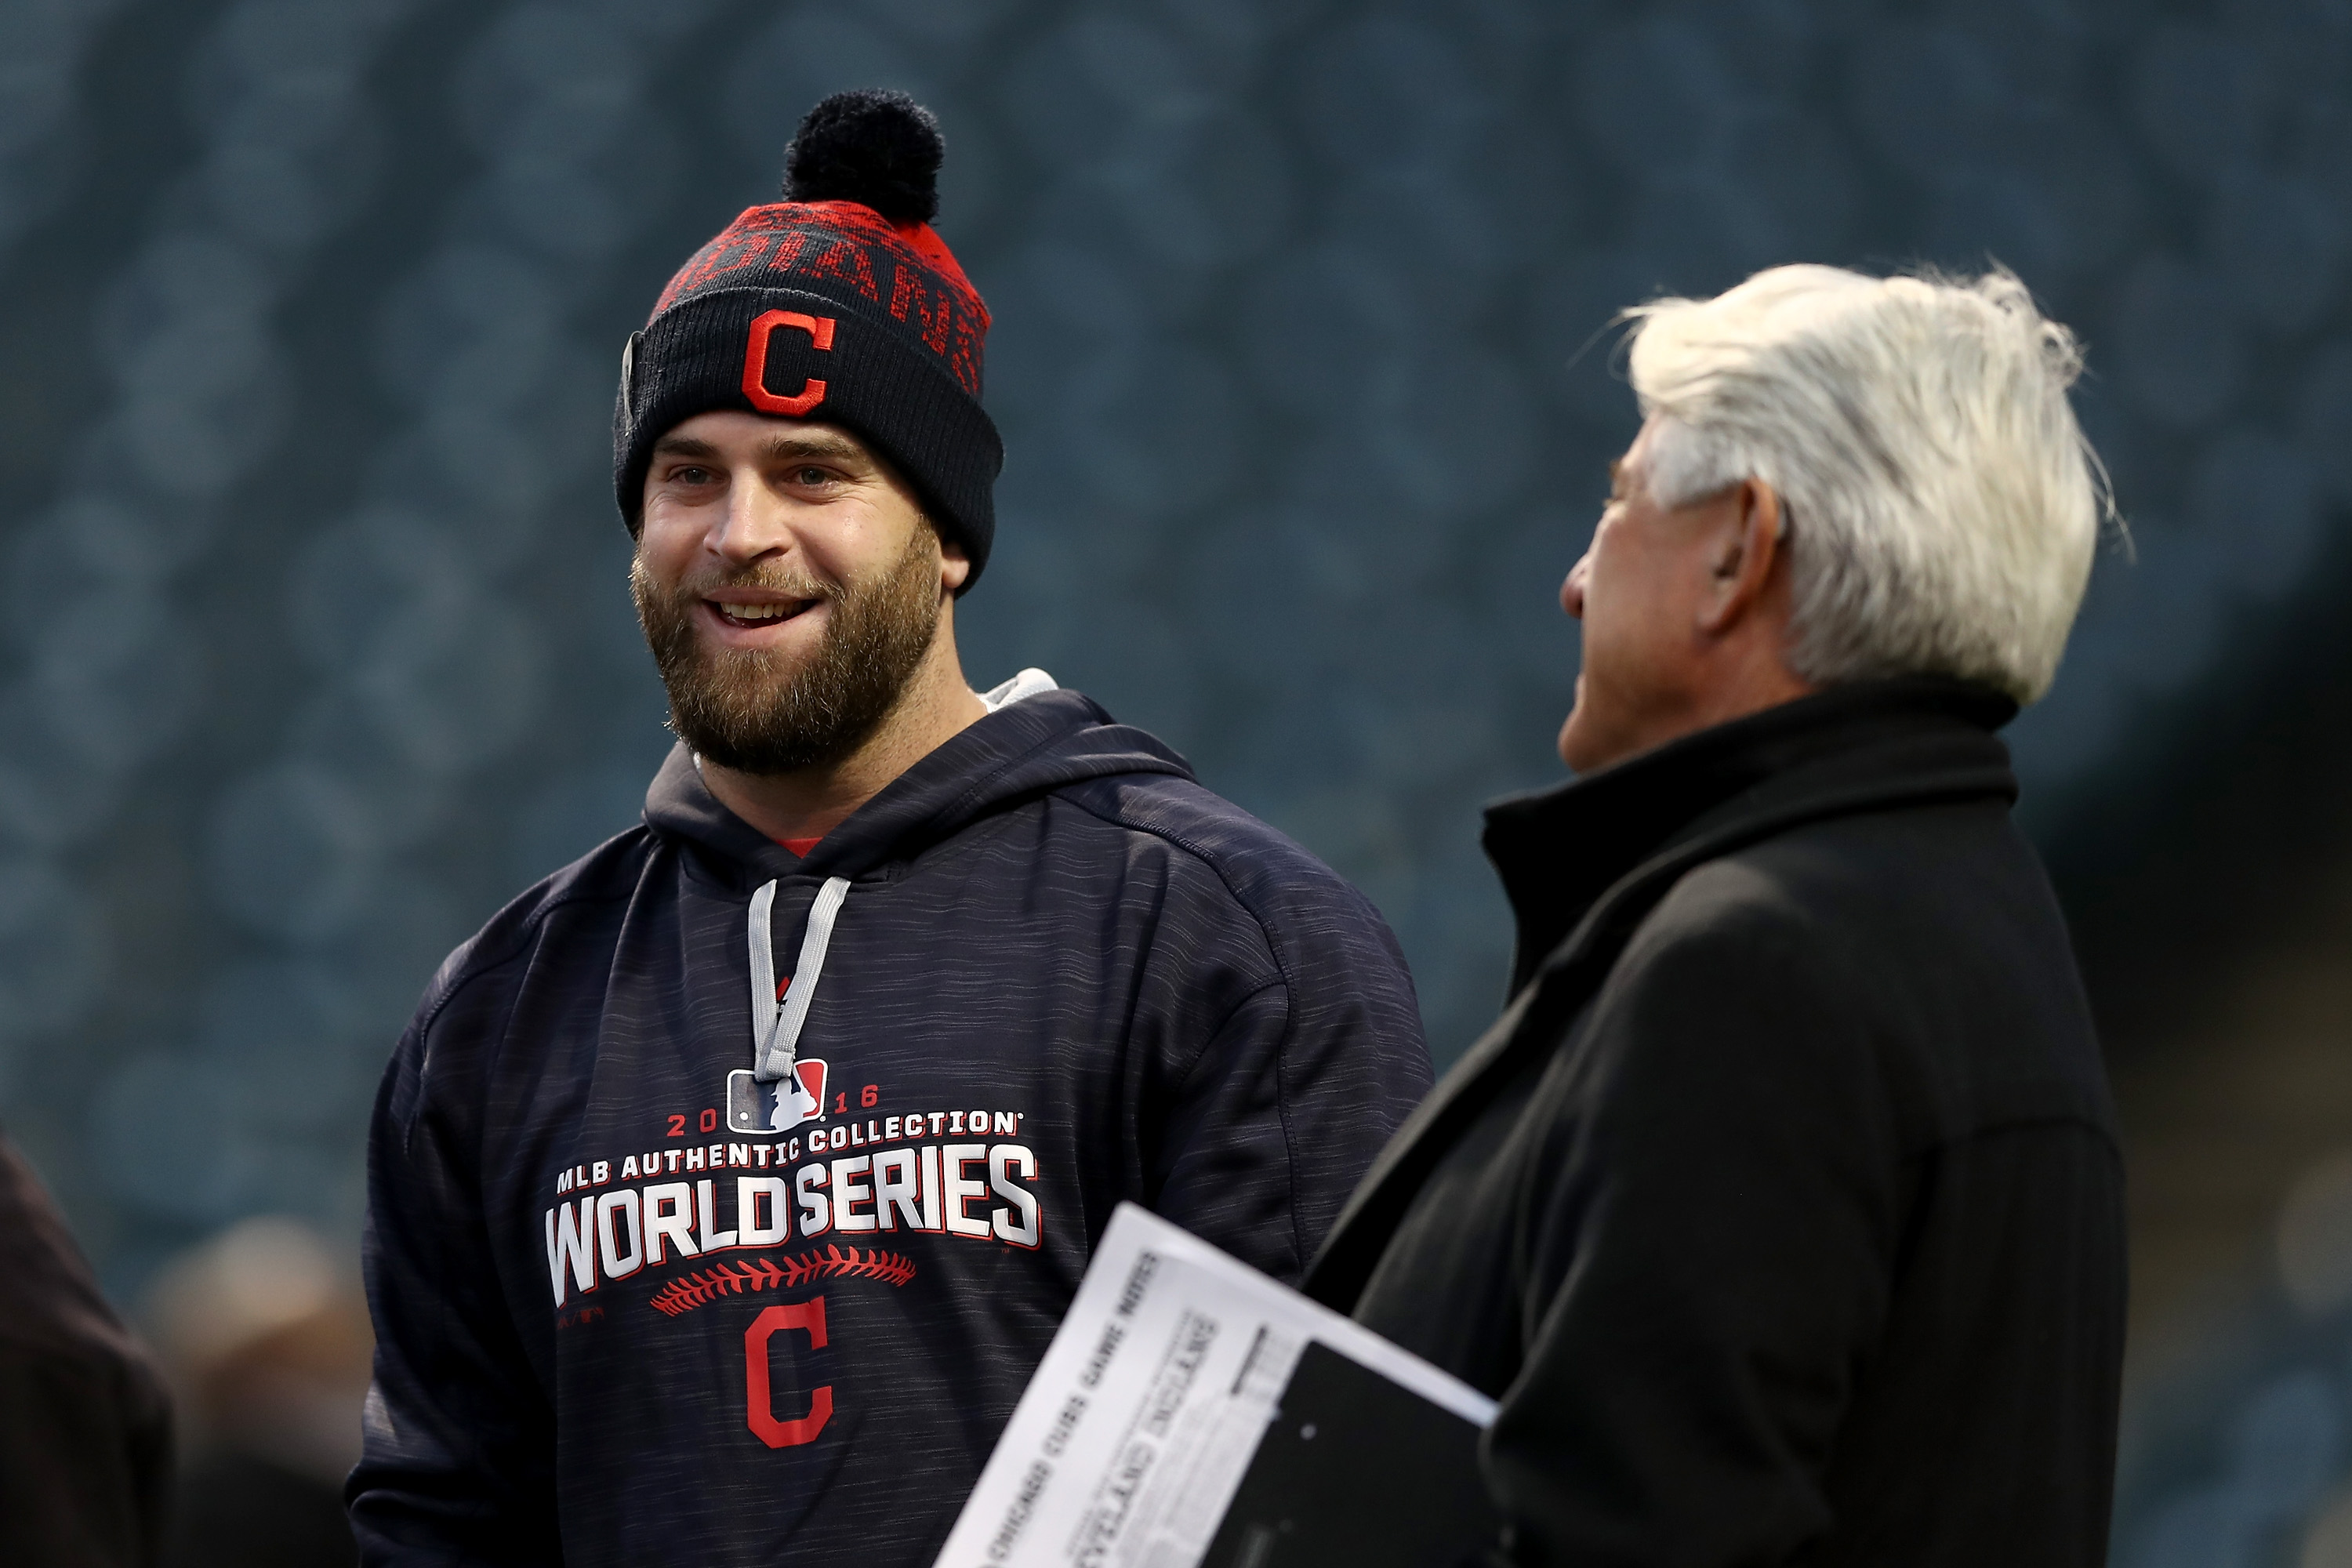 New York Mets, Cleveland Indians Traveling Similar Paths in Search of a World Series Title